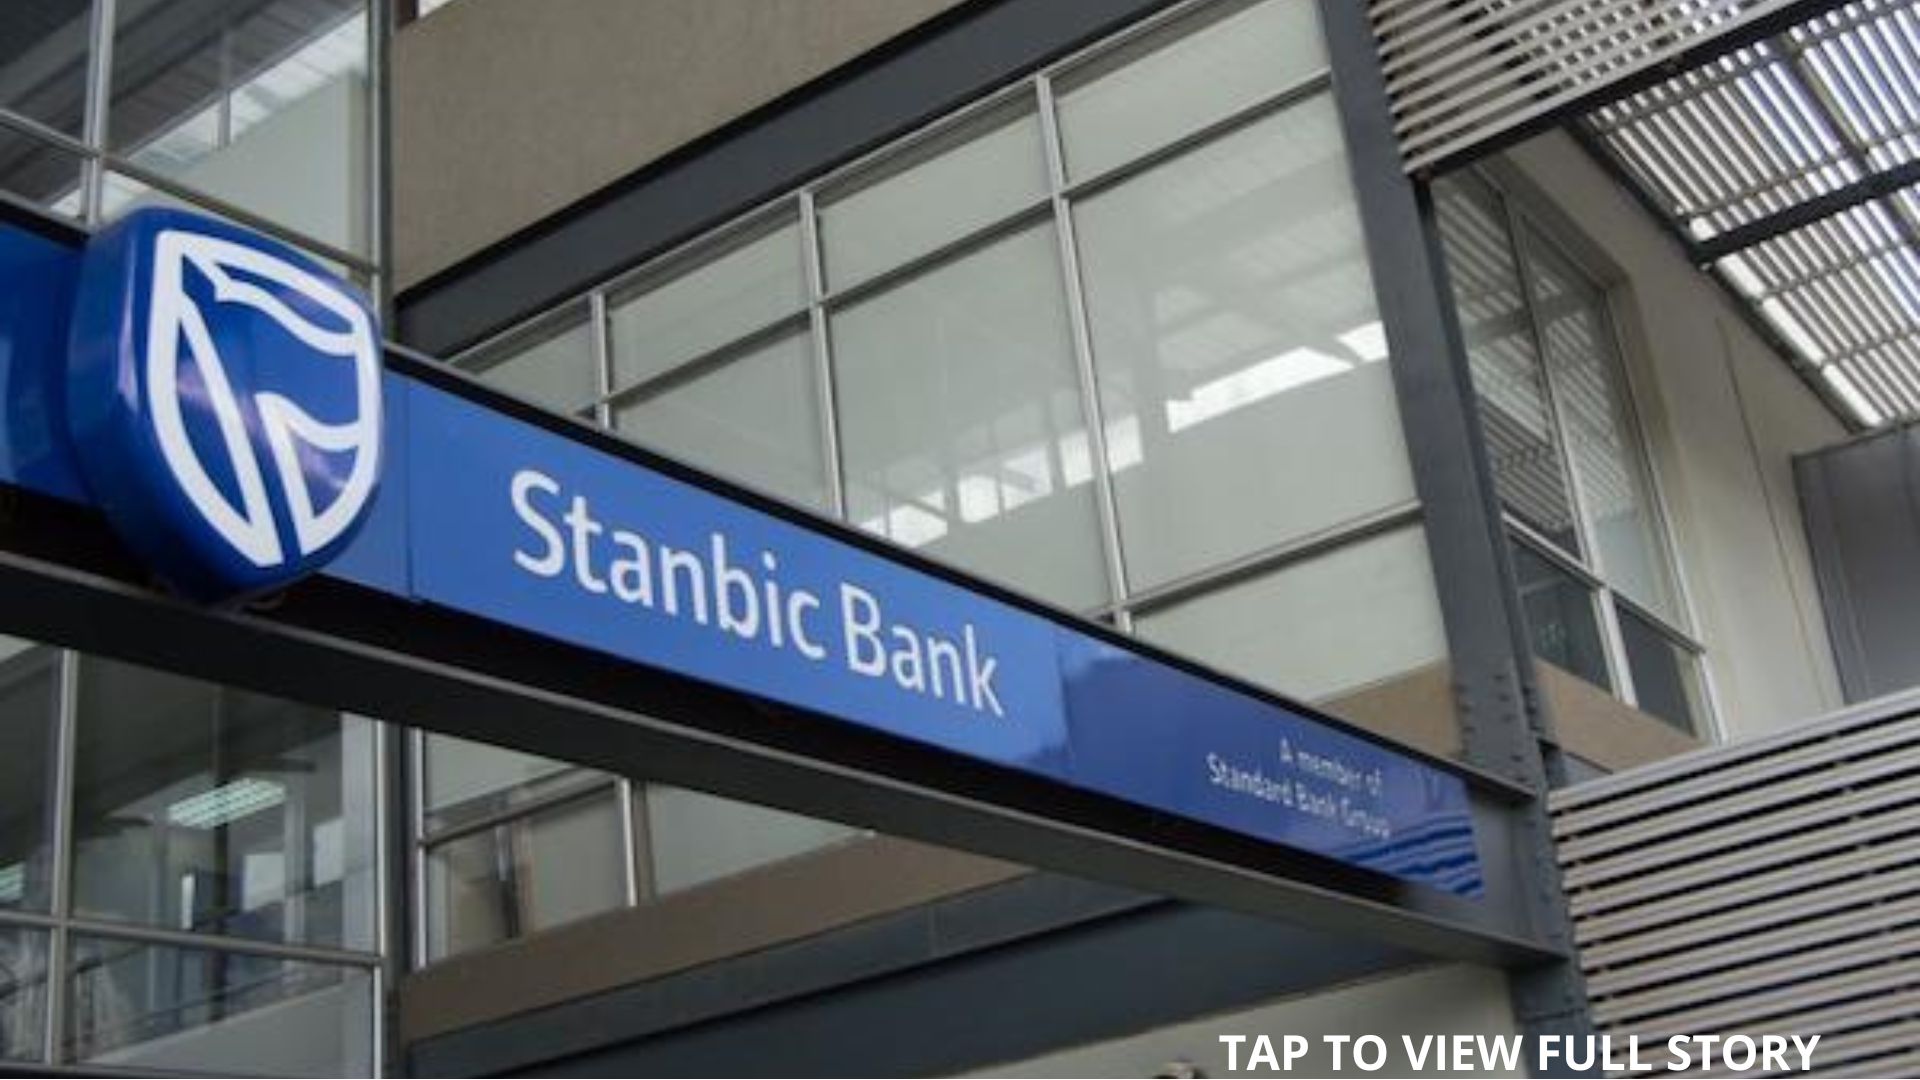 Stanbic IBTC will search shareholders’ approval to lift ₦550bn